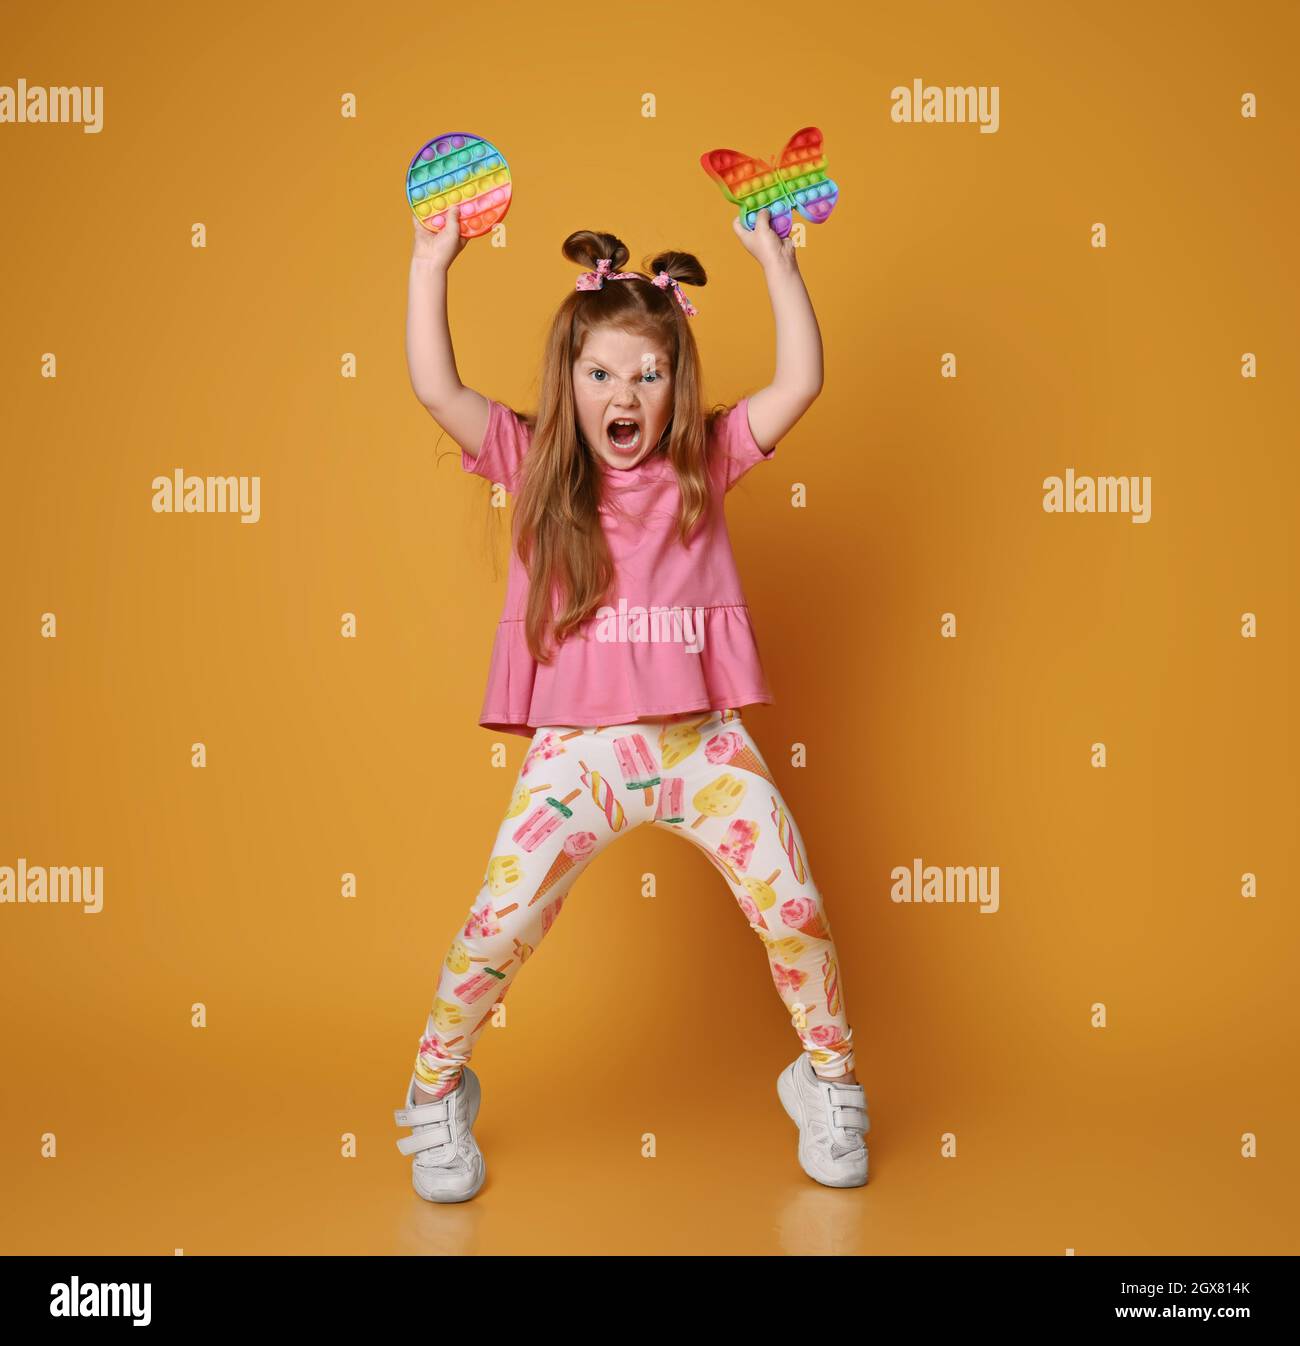 Spoiled, screaming loudly kid girl in colorful clothes going to throw two sensory rainbow color toys - round pop it Stock Photo